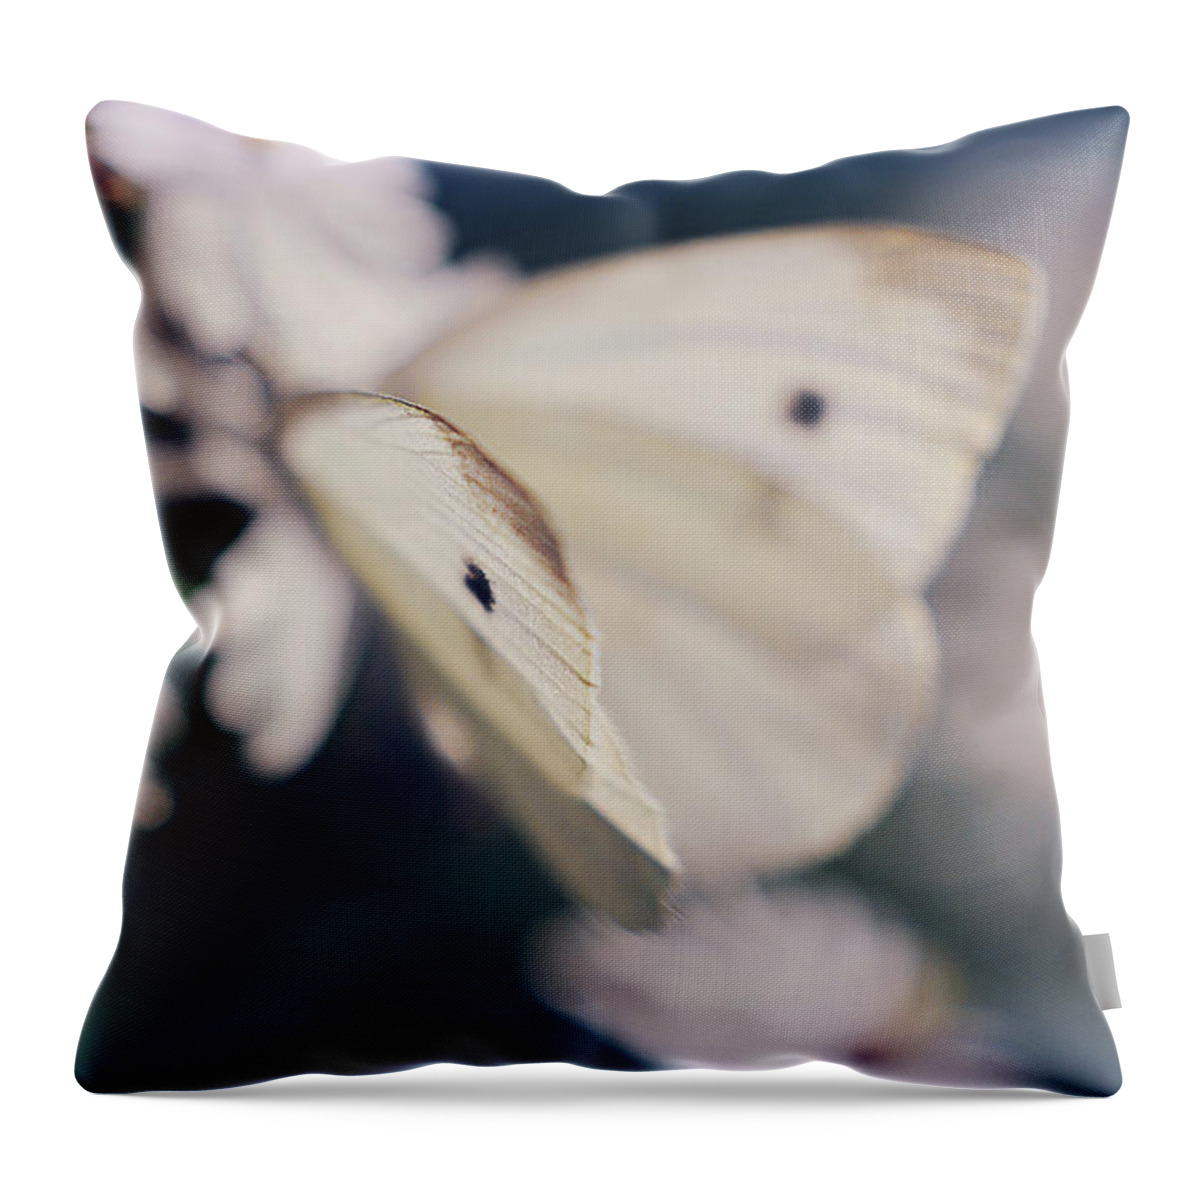 Blue Throw Pillow featuring the photograph Angelic by Michelle Wermuth